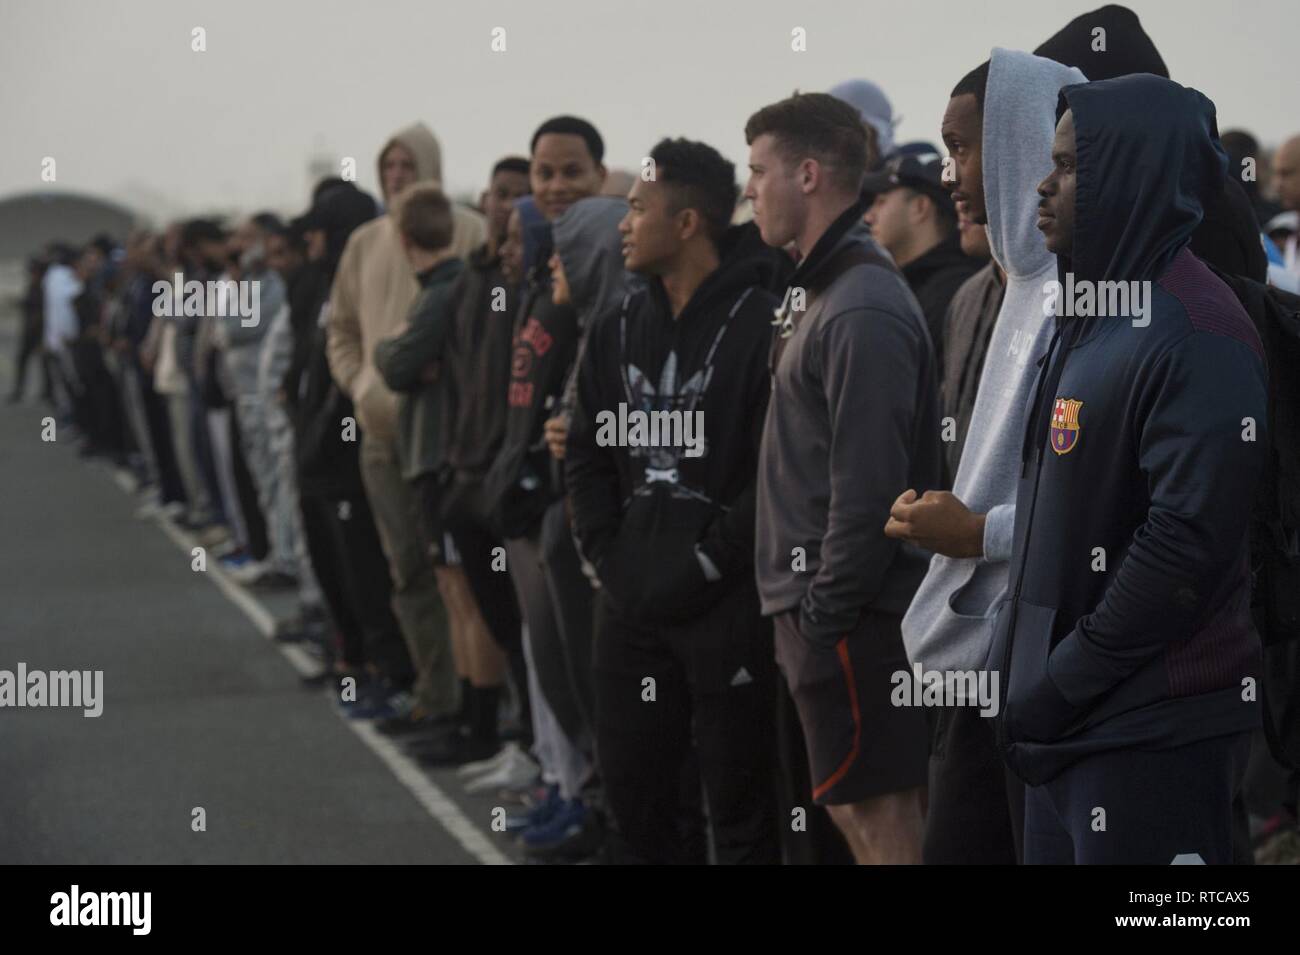 U.S., Qatar, and other coalition forces line up before a group run during Qatari National Sports Day Feb. 12, 2019, at Al Udeid Air Base, Qatar. U.S. and Qatar military forces were able to compete in team events including basketball, volleyball and soccer, as well as individual events such as swimming and ping pong throughout the morning. Qatari National Sports Day provided servicemembers from both nations an opportunity to strengthen military relations through friendly competition. Stock Photo